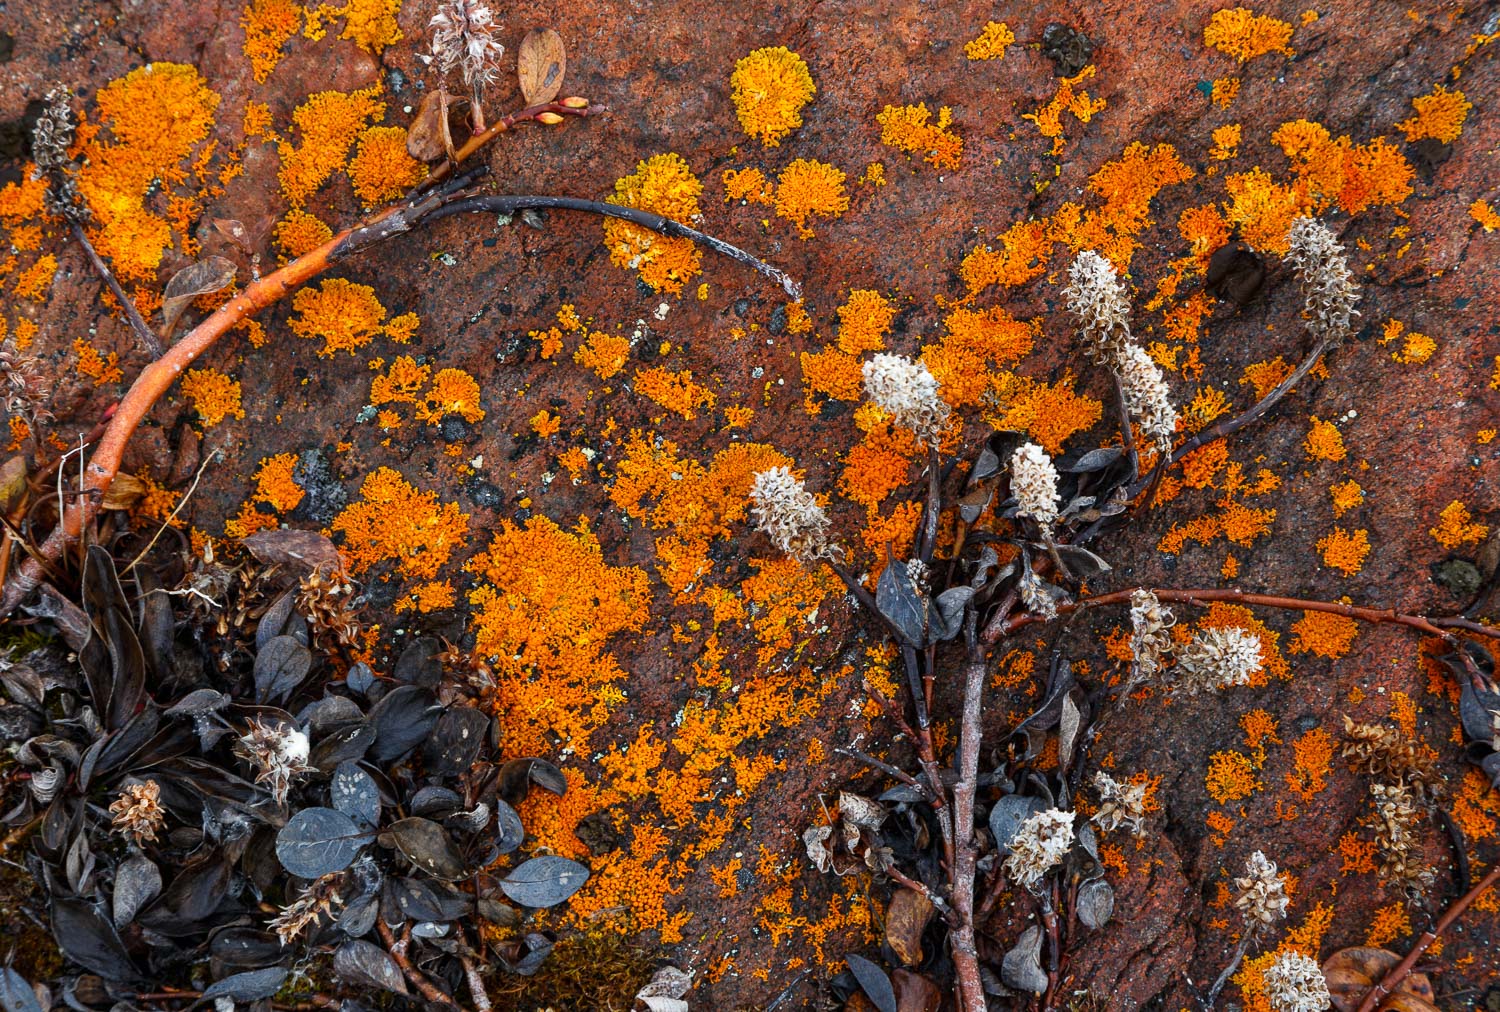 Arctic Willow, Rock and Lichen